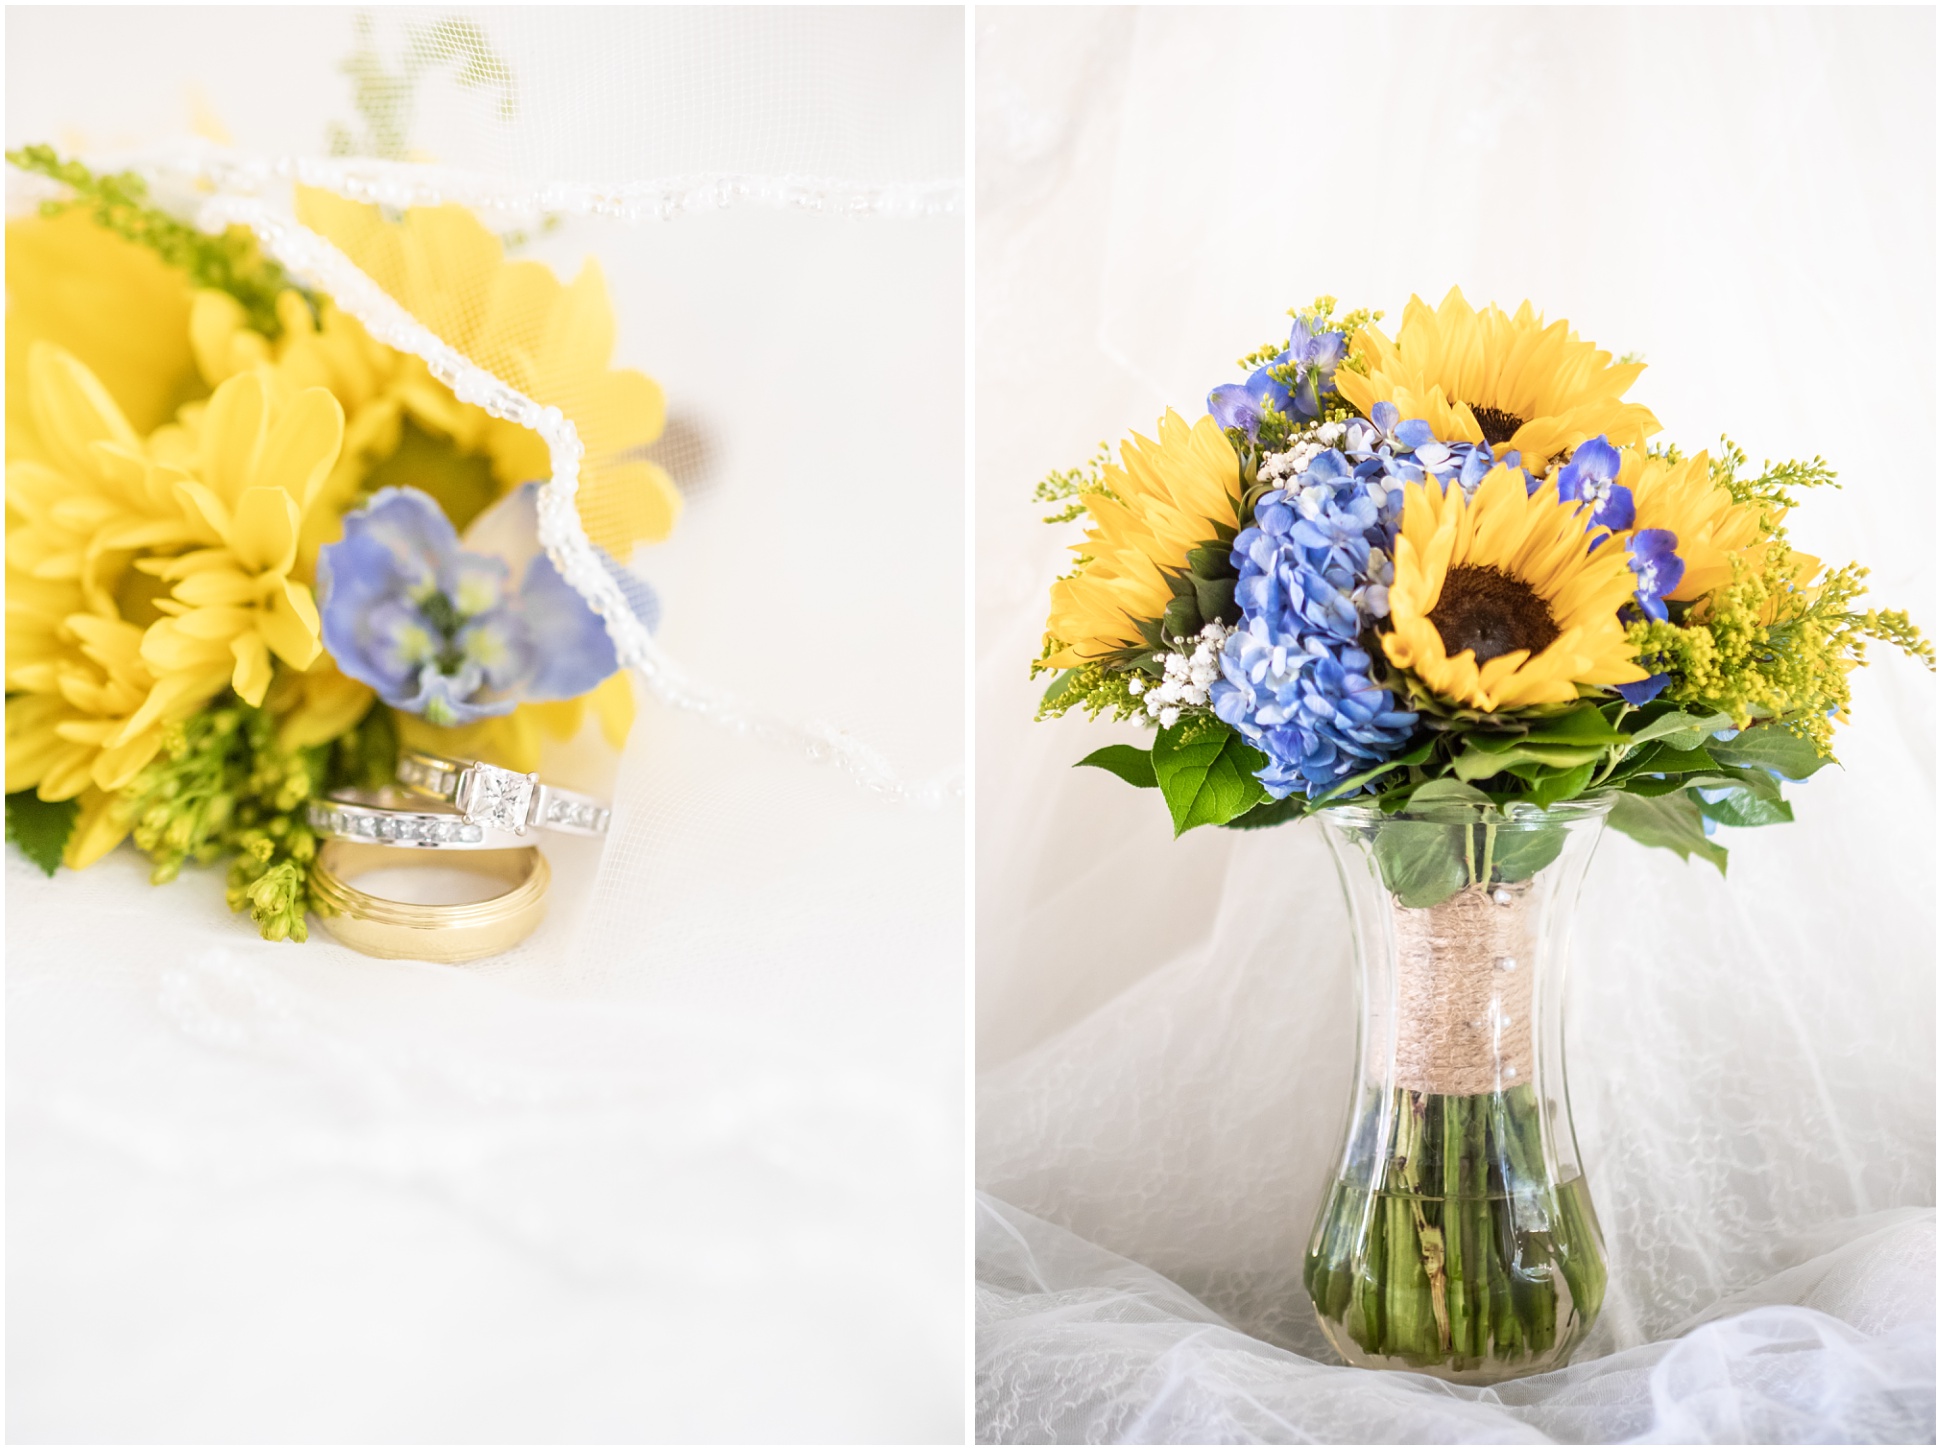 Left: Wedding Rings with sunflowers and veil, Right Image: Bridal bouquet